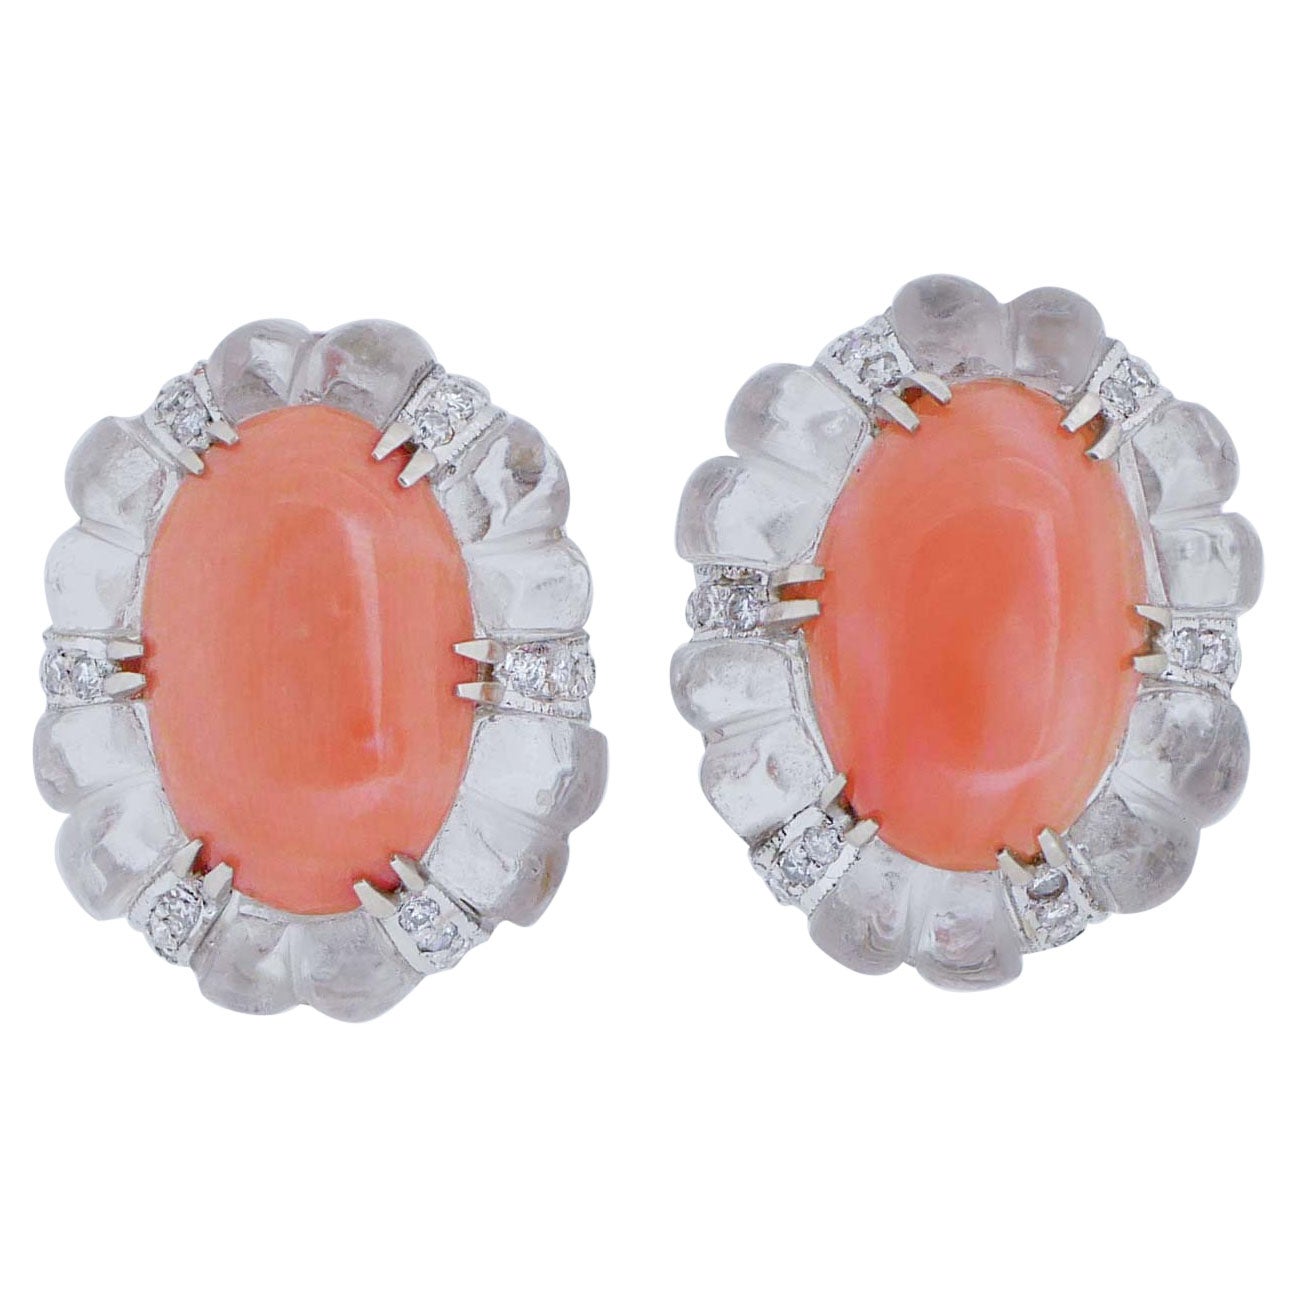 Rock Crystal, Coral, Diamonds, 14 Kt White Gold Earrings. For Sale